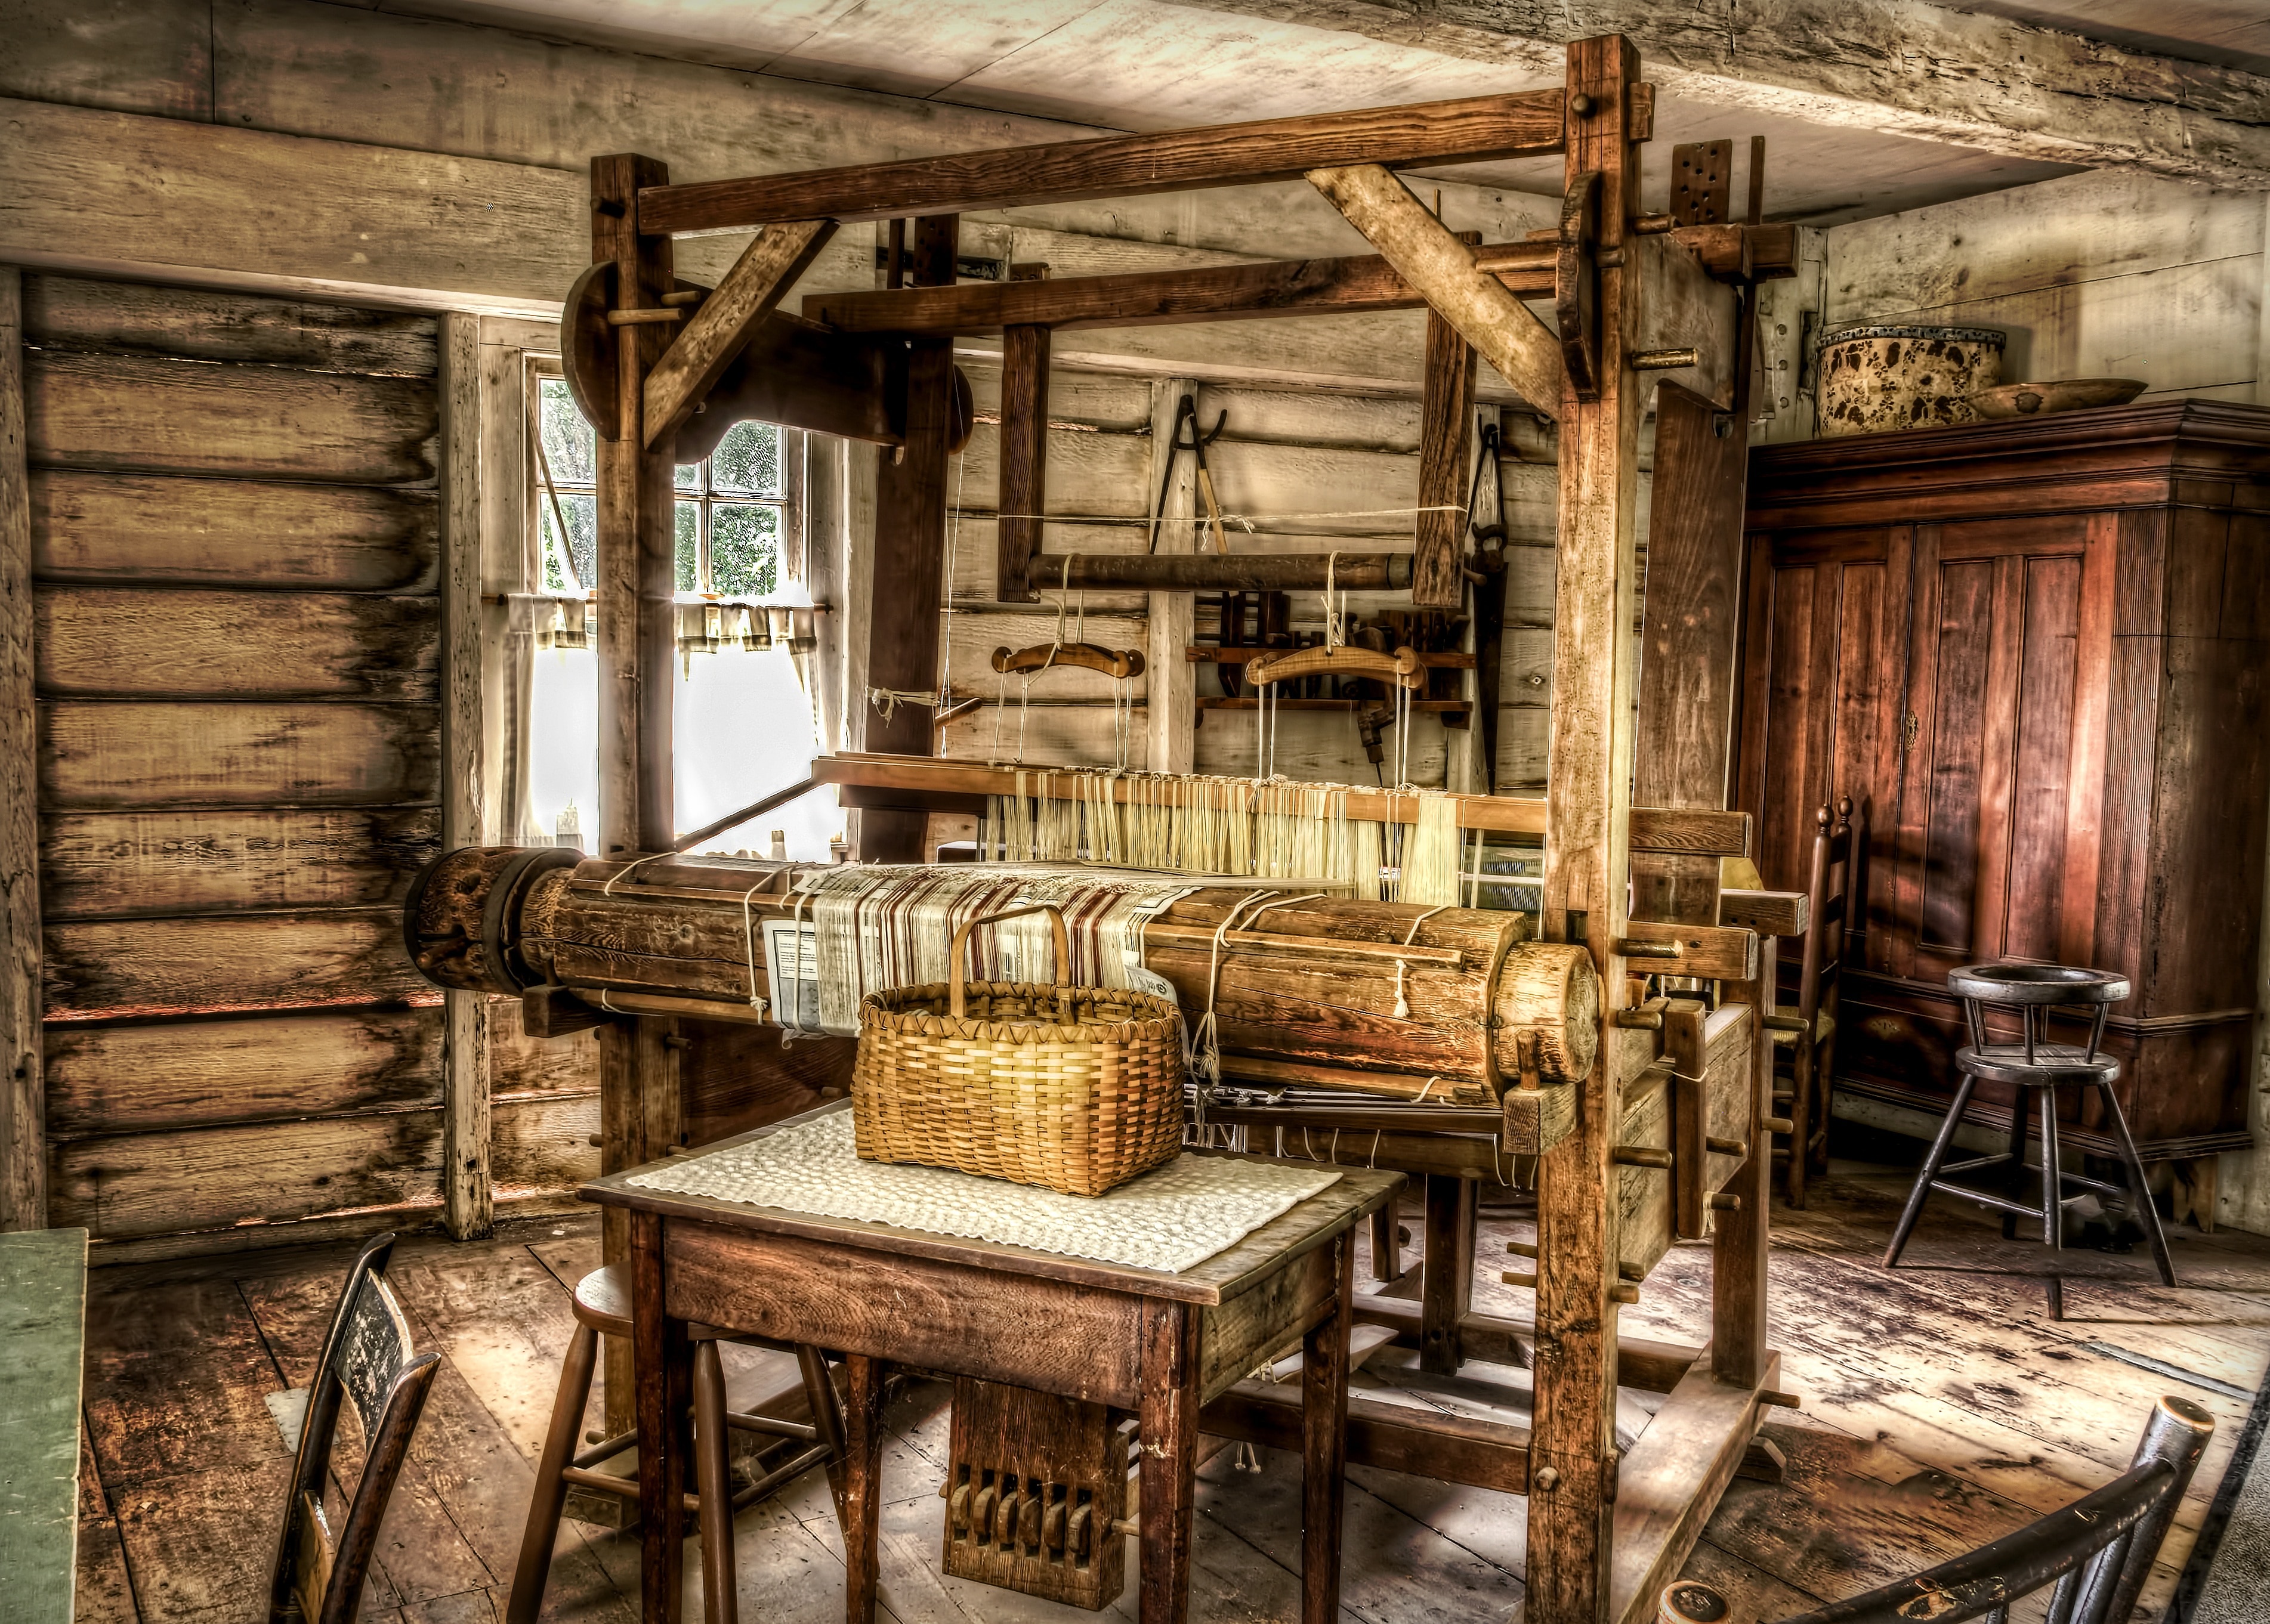 Loom, Weave, Vintage, Historic, Building, chair, old-fashioned